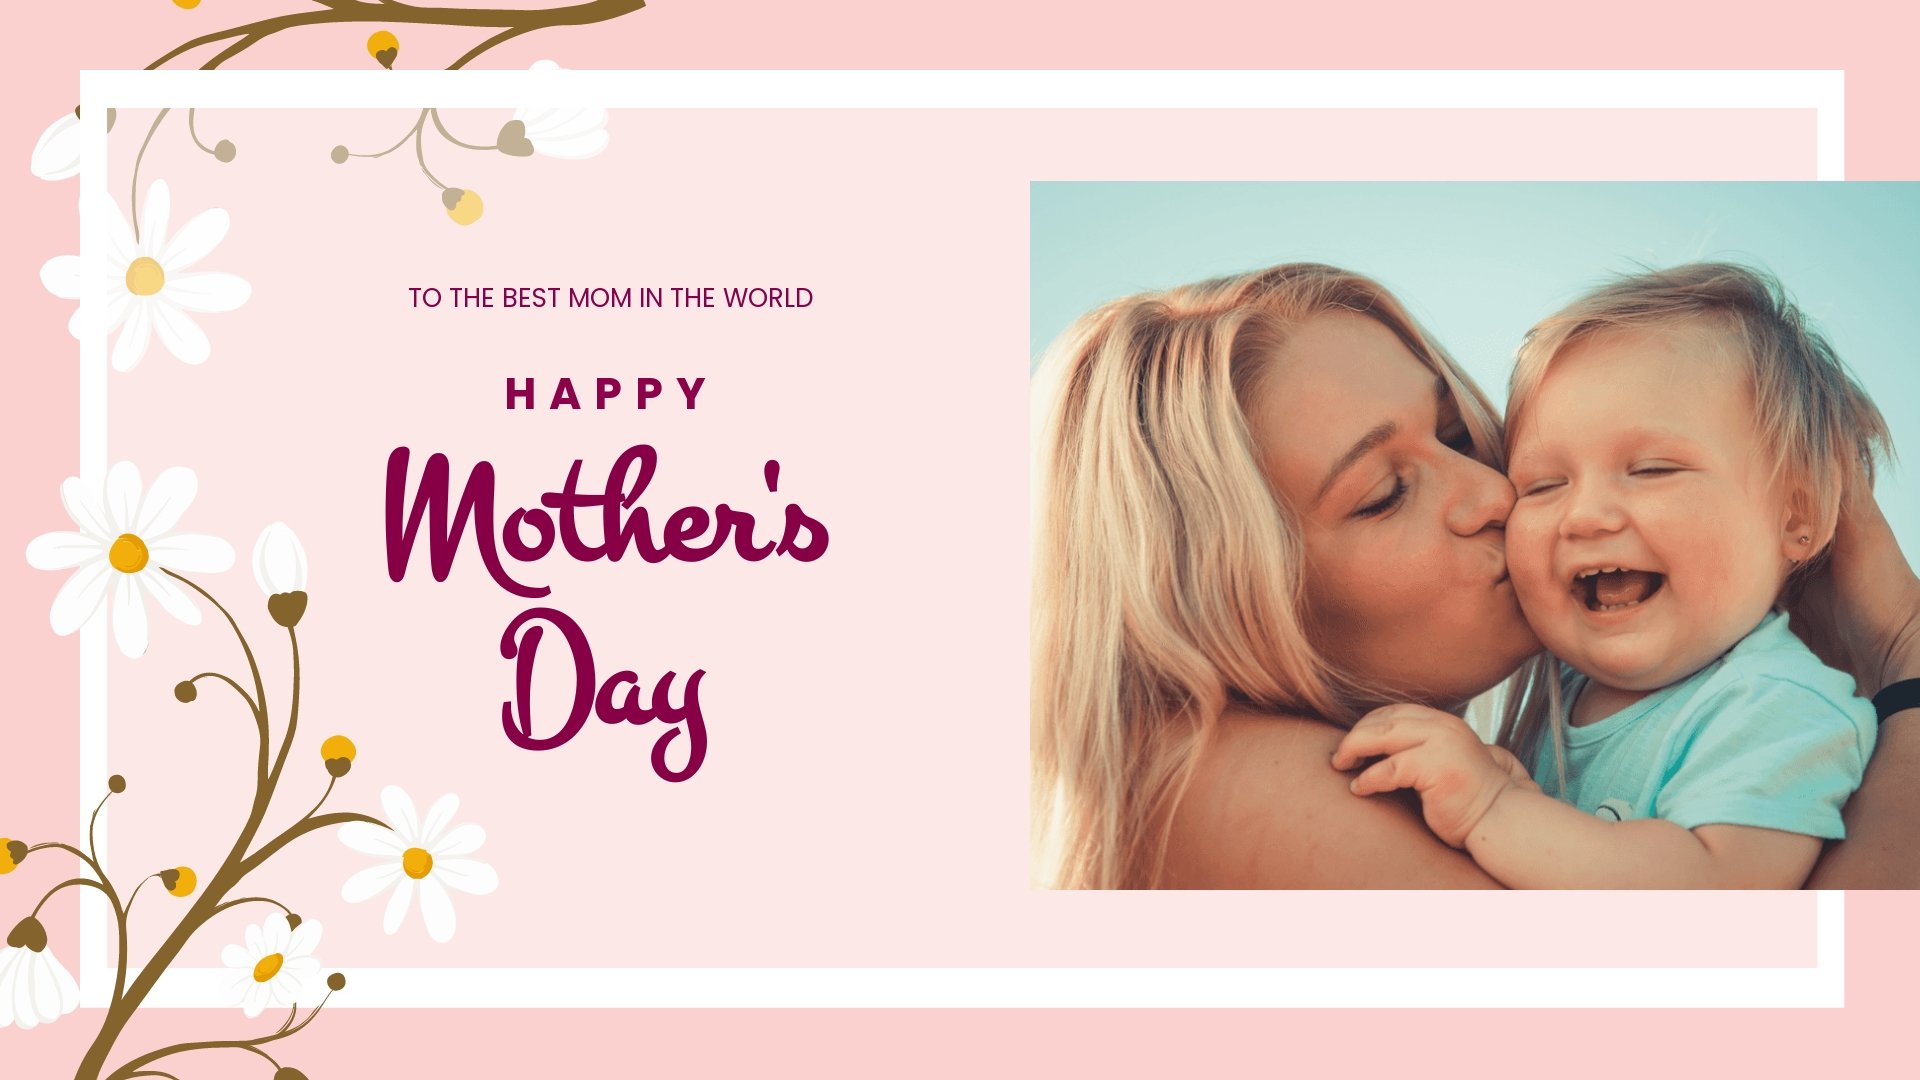 Free Mother's Day Greeting Image Template